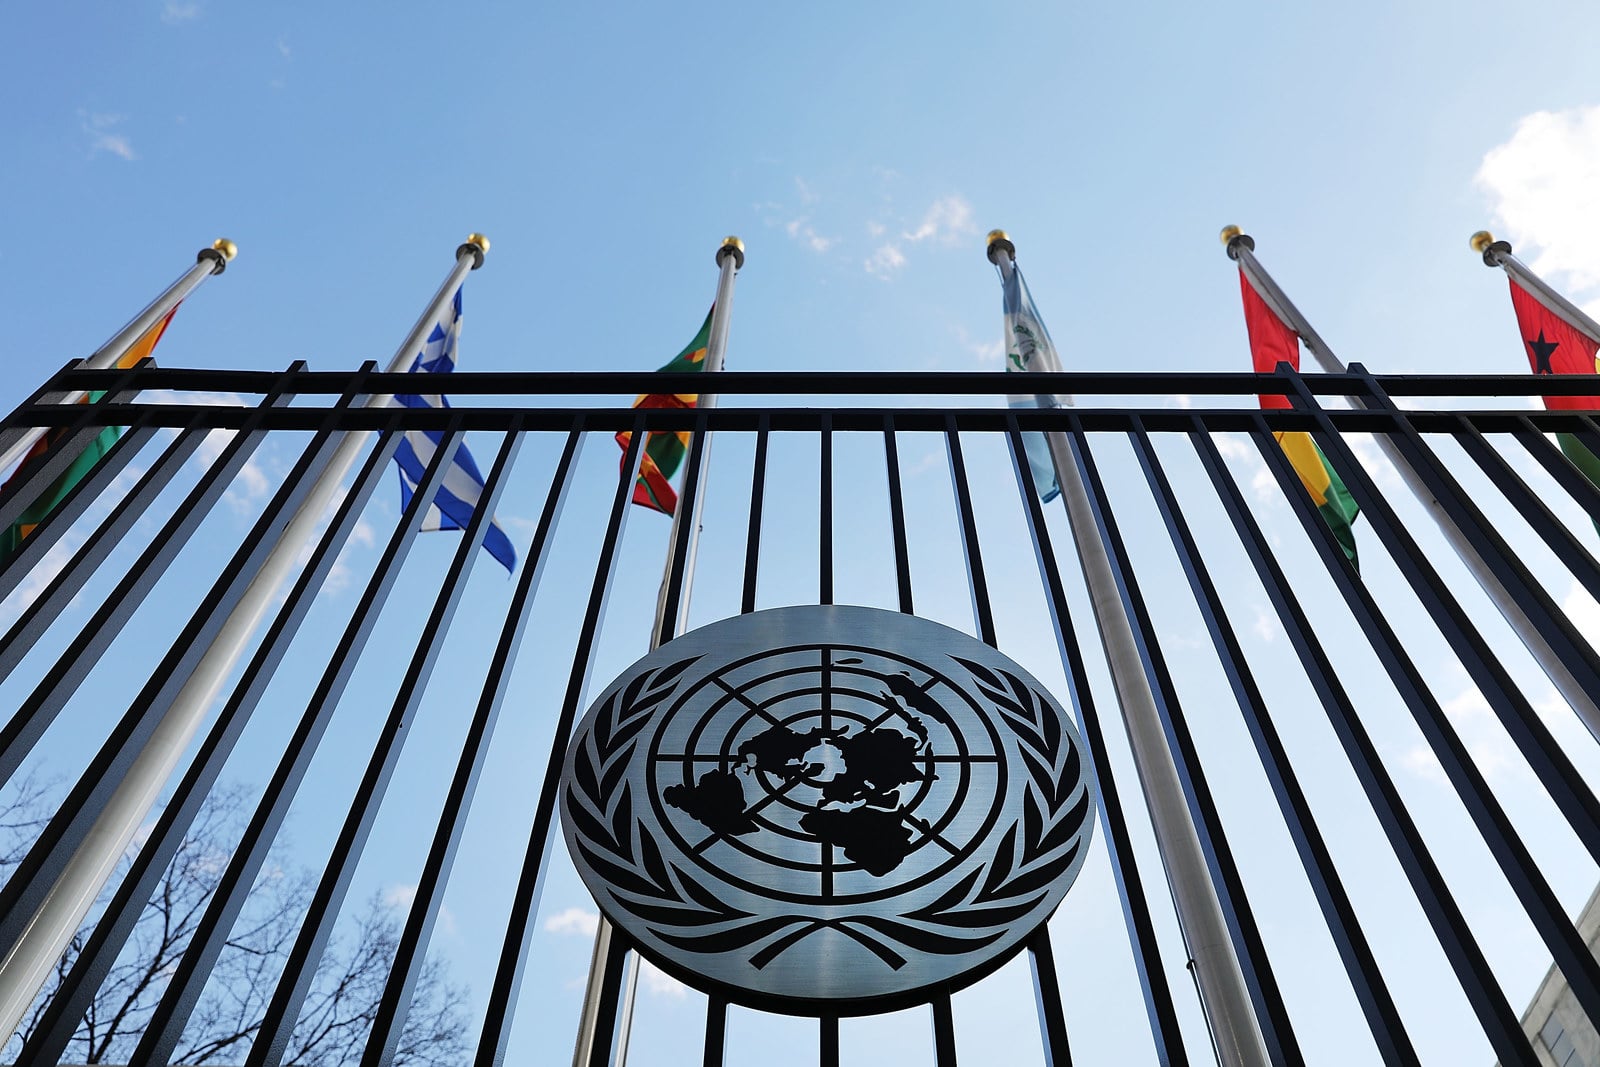 UN emblem on the fence of the United Nations headquarters in New York, with some flags in the background. Photo: United Nations.